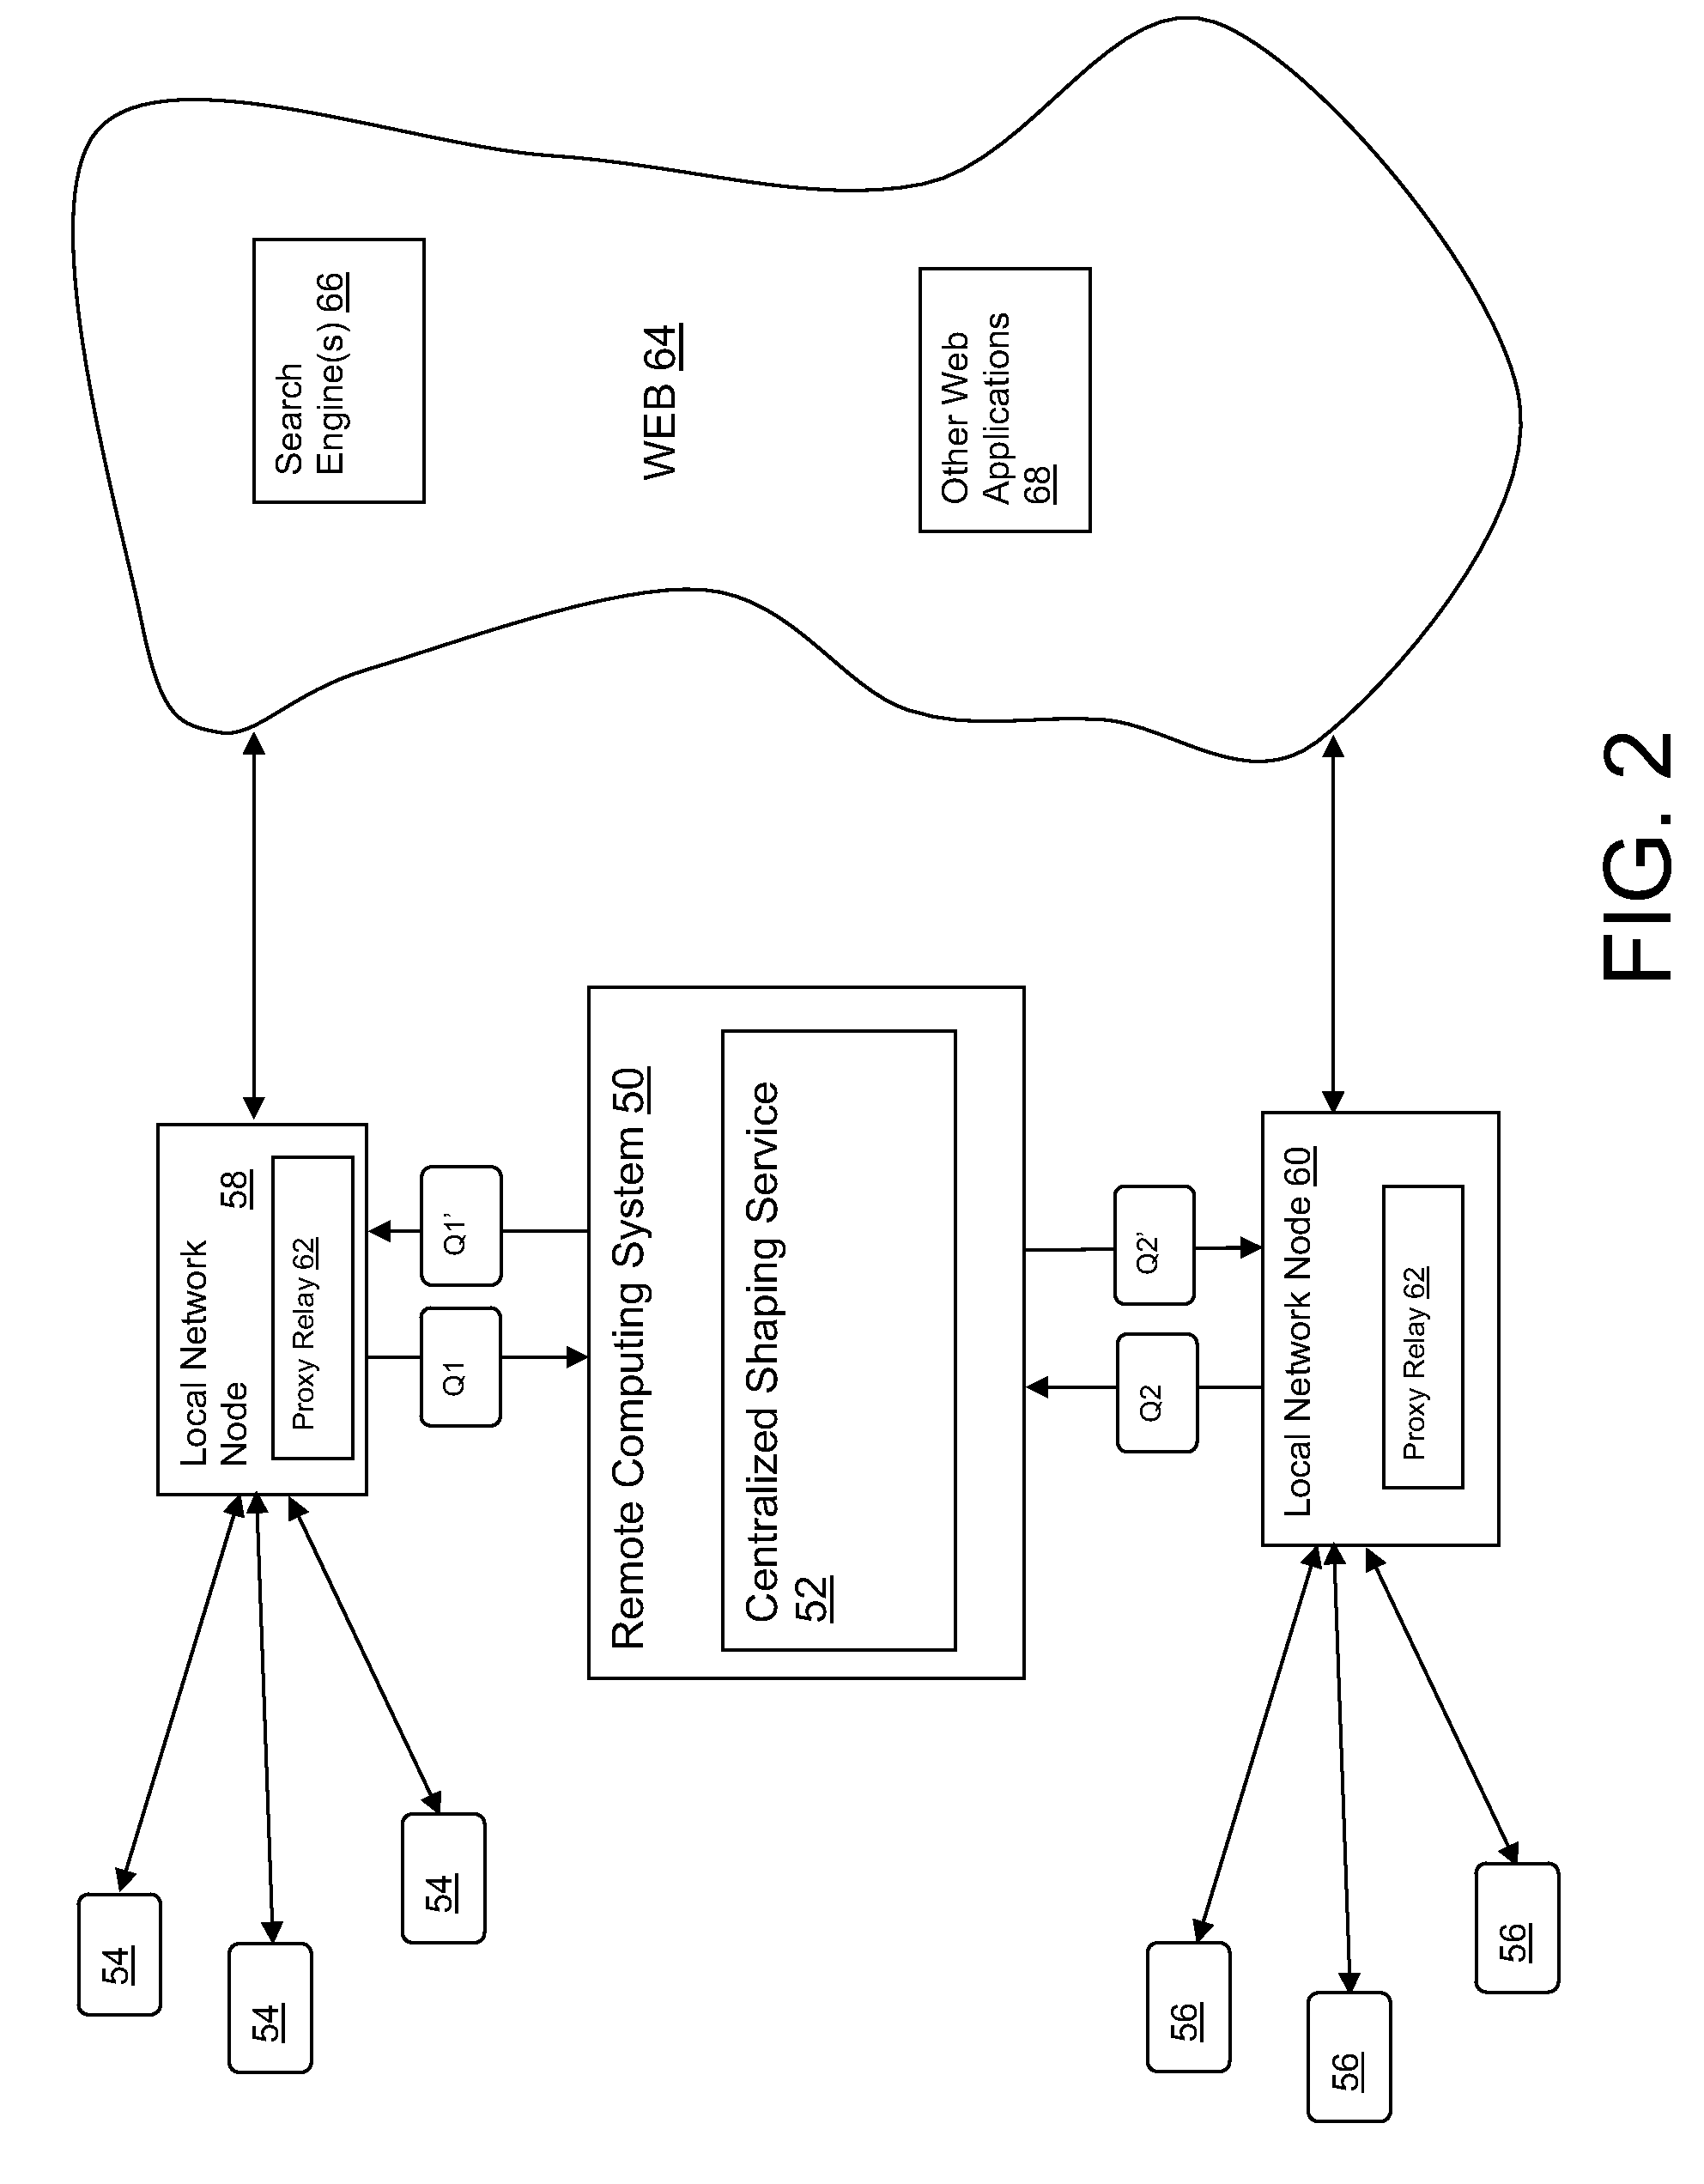 System and method for modifying internet traffic and controlling search responses